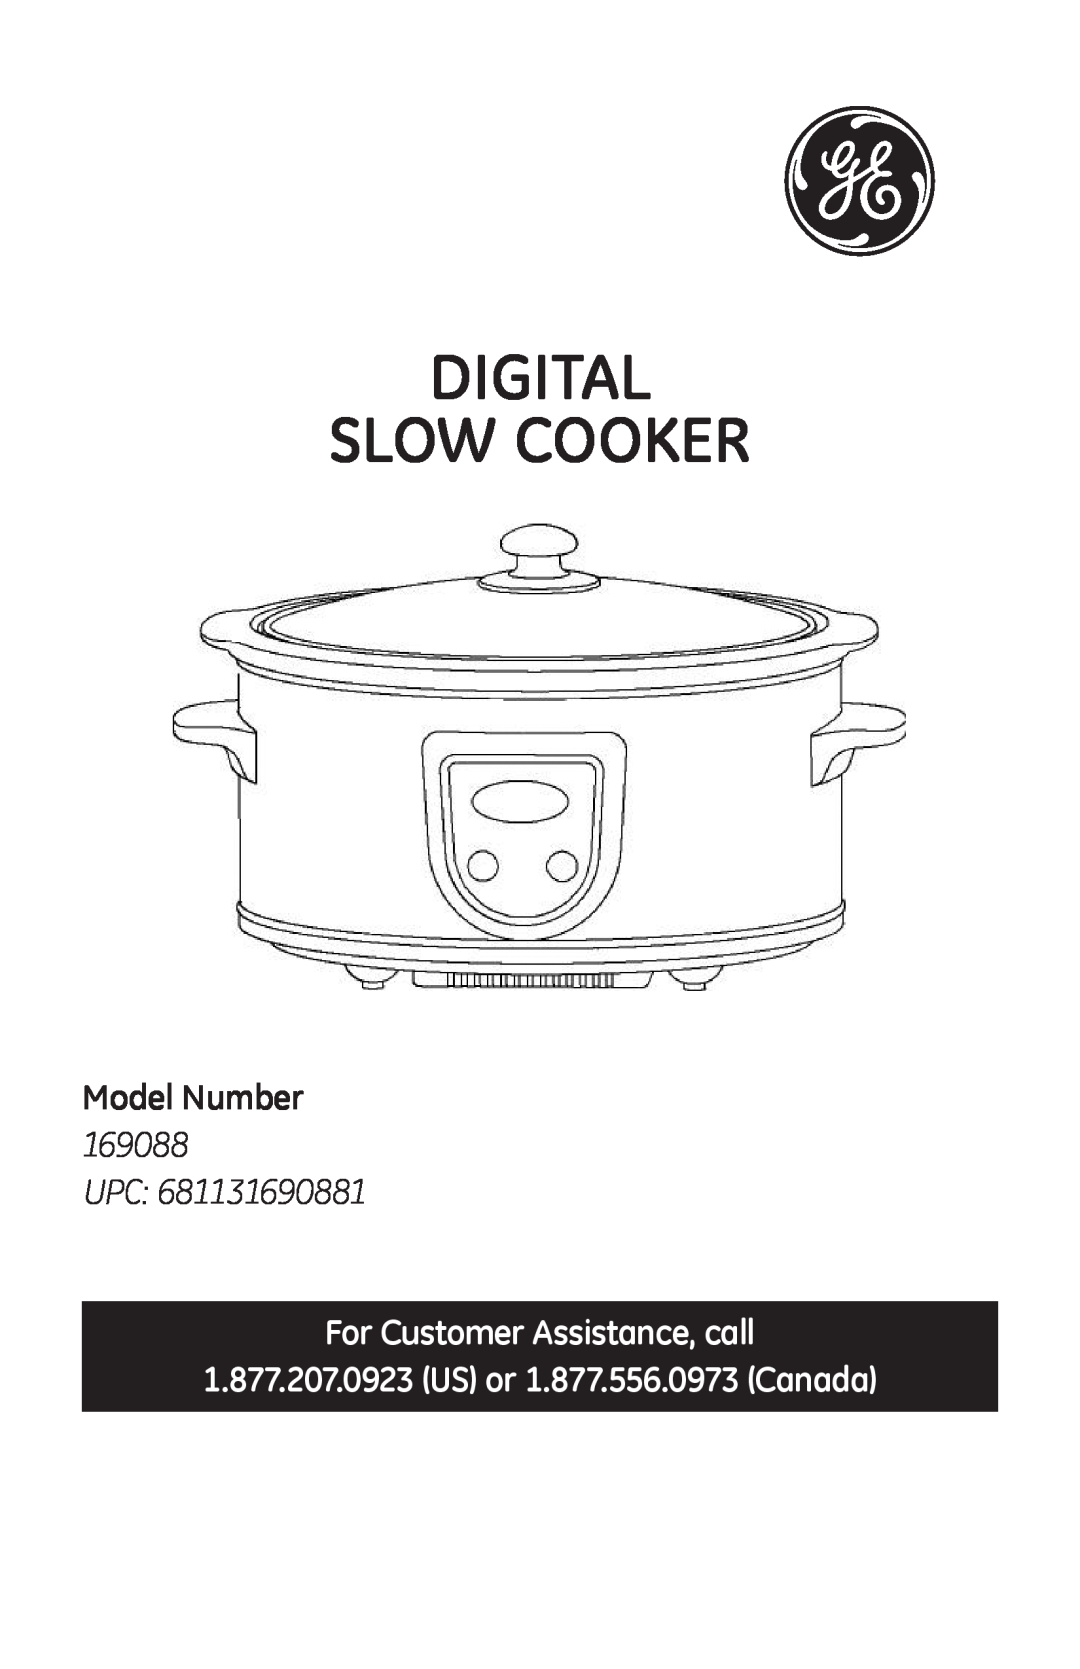 GE 169088 manual Digital Slow Cooker, Upc, Model Number, For Customer Assistance, call, US or 1.877.556.0973 Canada 